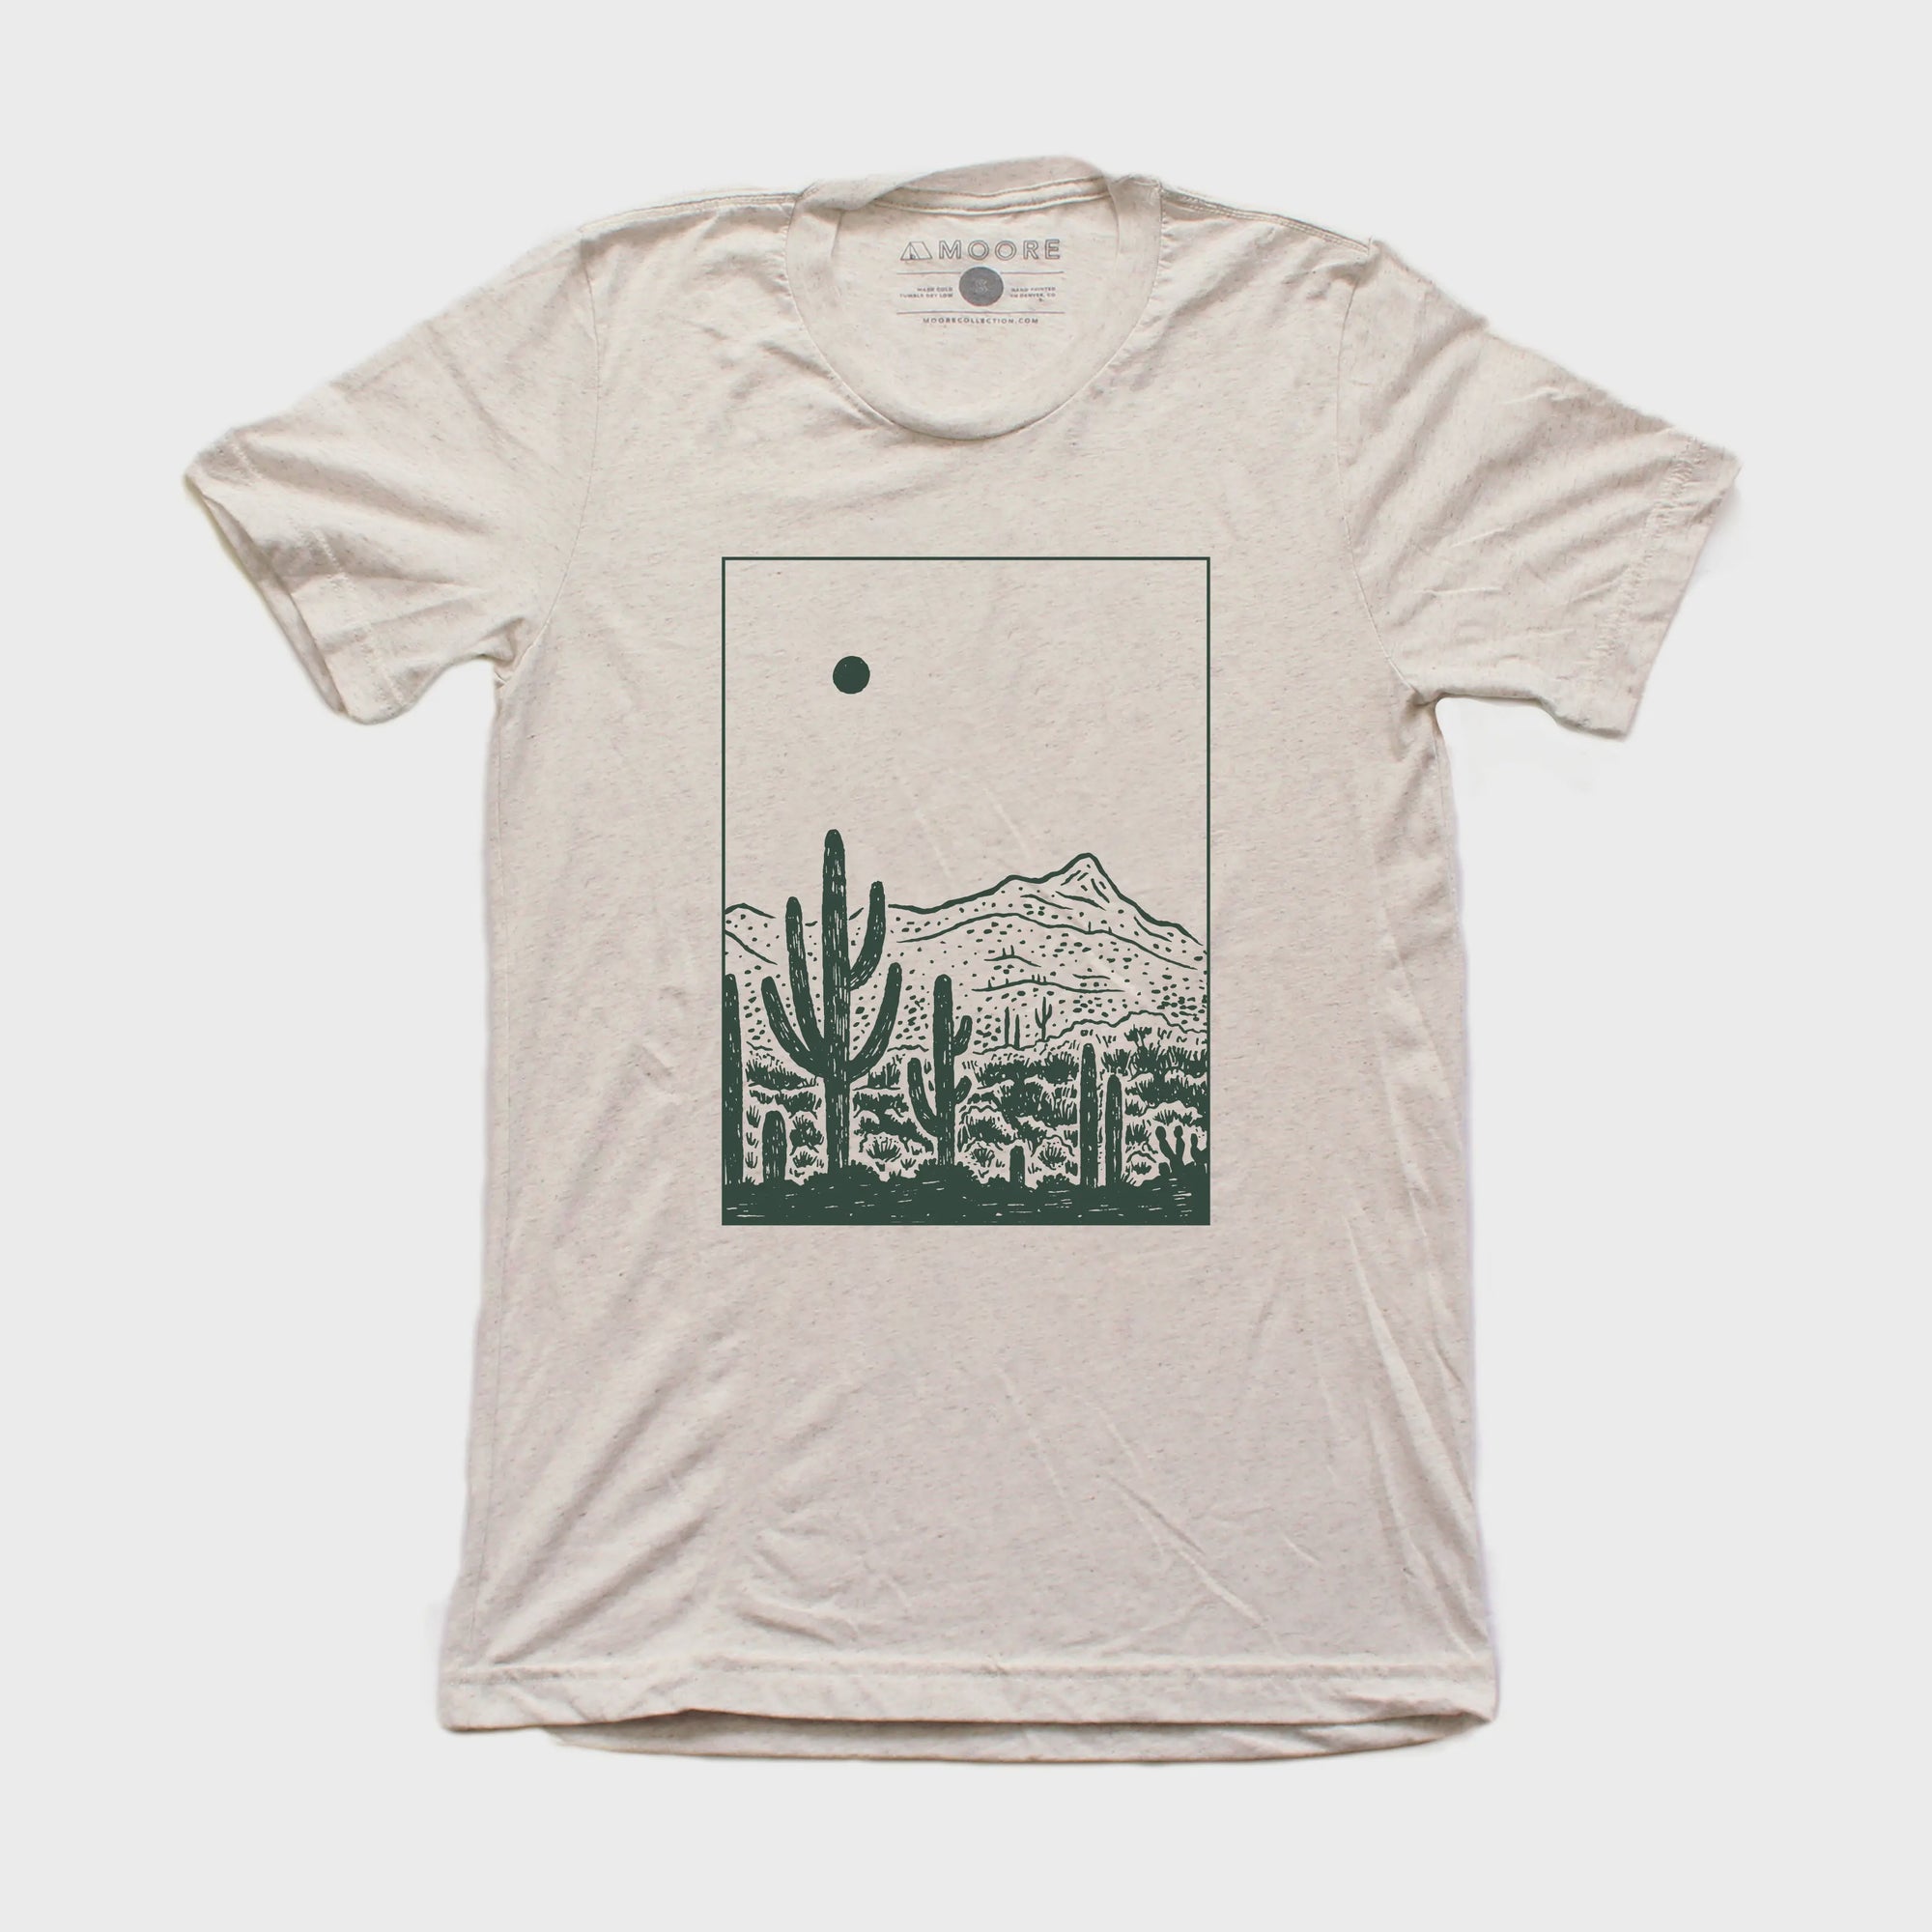 The Desert Tee by Moore Collection